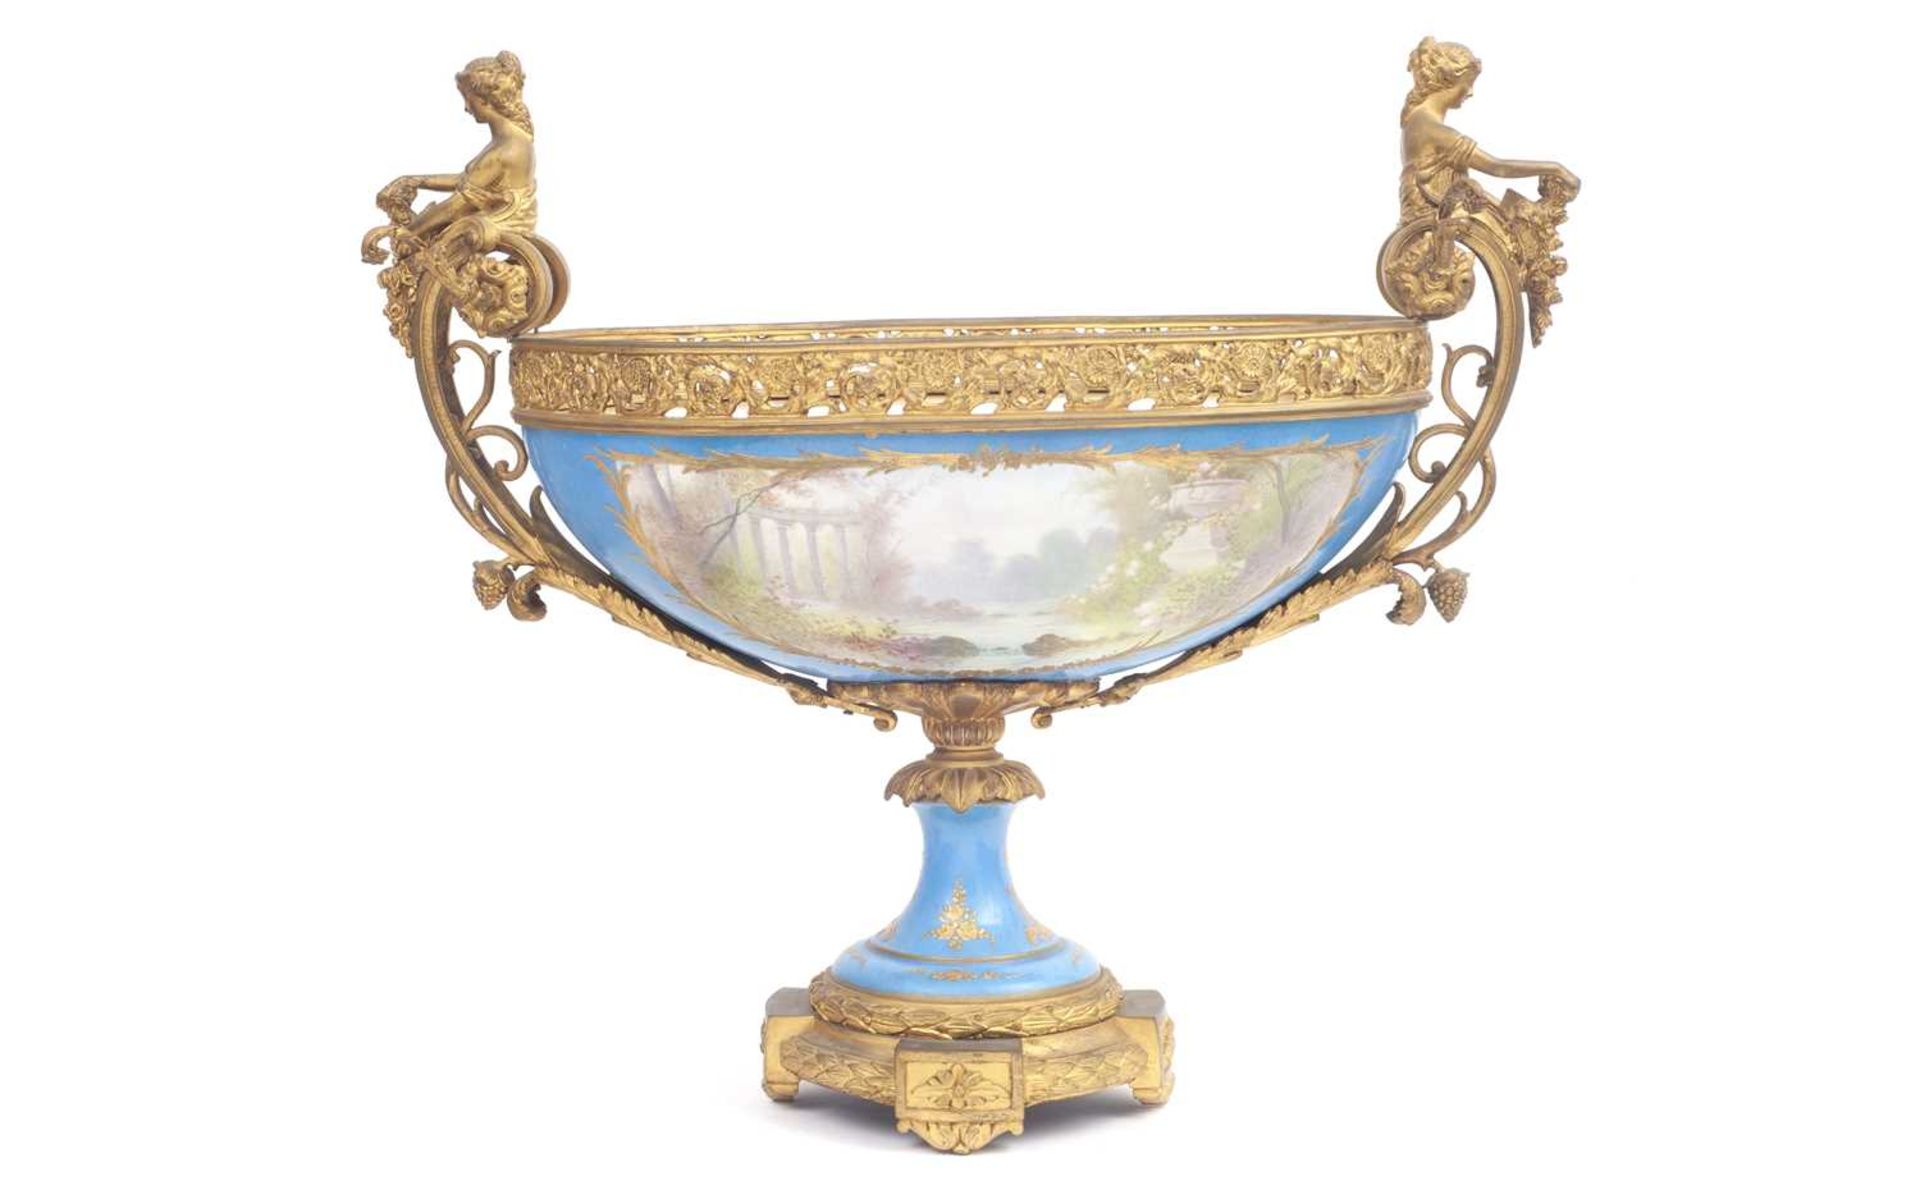 A VERY LARGE LATE 19TH CENTURY FRENCH SEVRES STYLE PORCELAIN AND ORMOLU MOUNTED JARDINIERE - Bild 2 aus 4